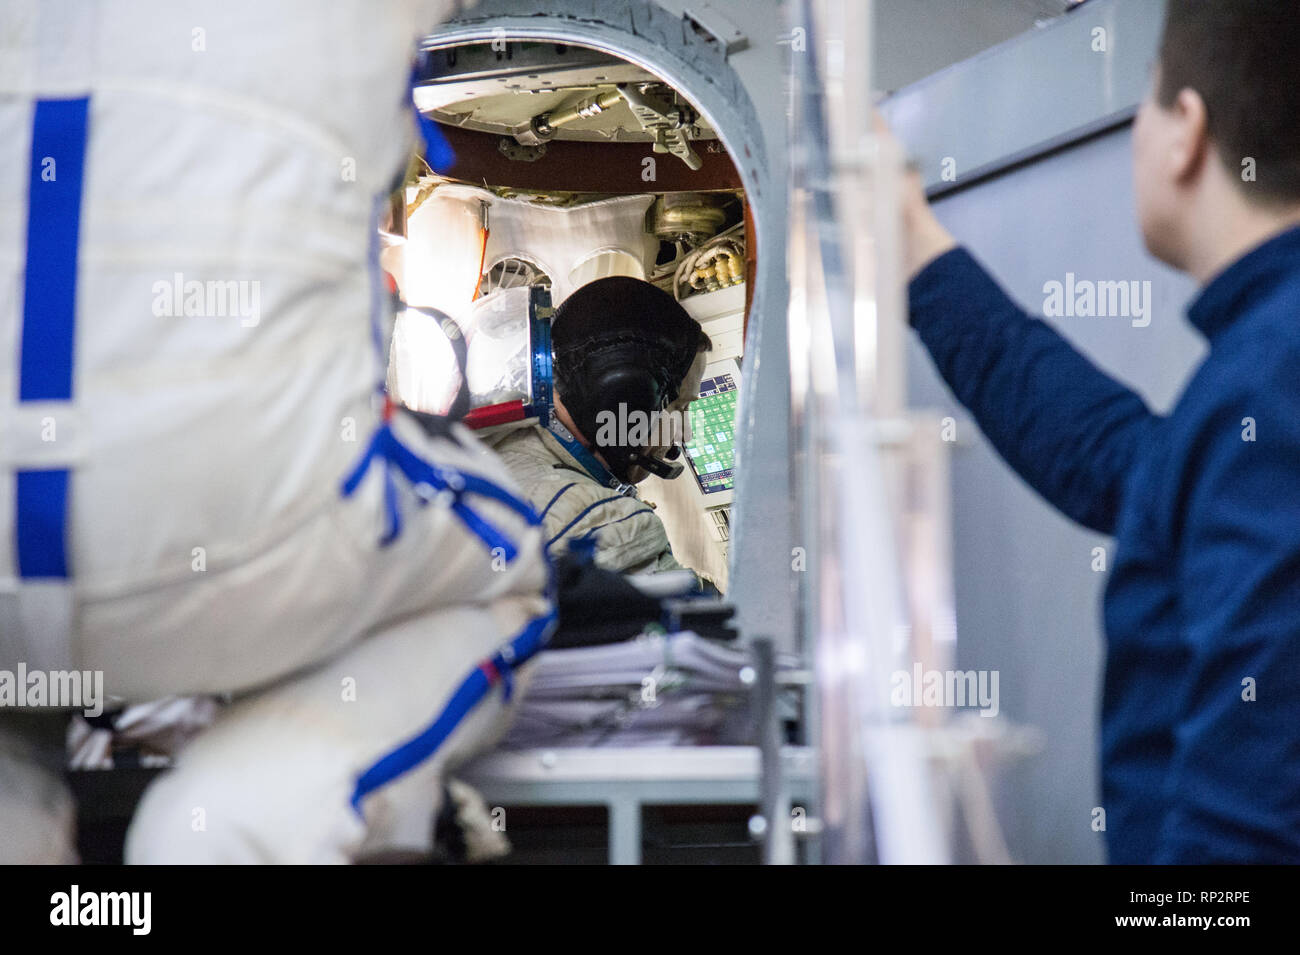 Star City, Russia. 20th Feb, 2019. International Space Station Expedition 59 crew member Nick Hague of NASA works inside the Soyuz spacecraft simulator February 20, 2019 at Star City, Russia. The crew of Christina Koch, Alexey Ovchinin and Nick Hague will launch March 14th from the Baikonur Cosmodrome in Kazakhstan on the Soyuz MS-12 spacecraft for a six-and-a-half month mission on the International Space Station. Credit: Planetpix/Alamy Live News Stock Photo